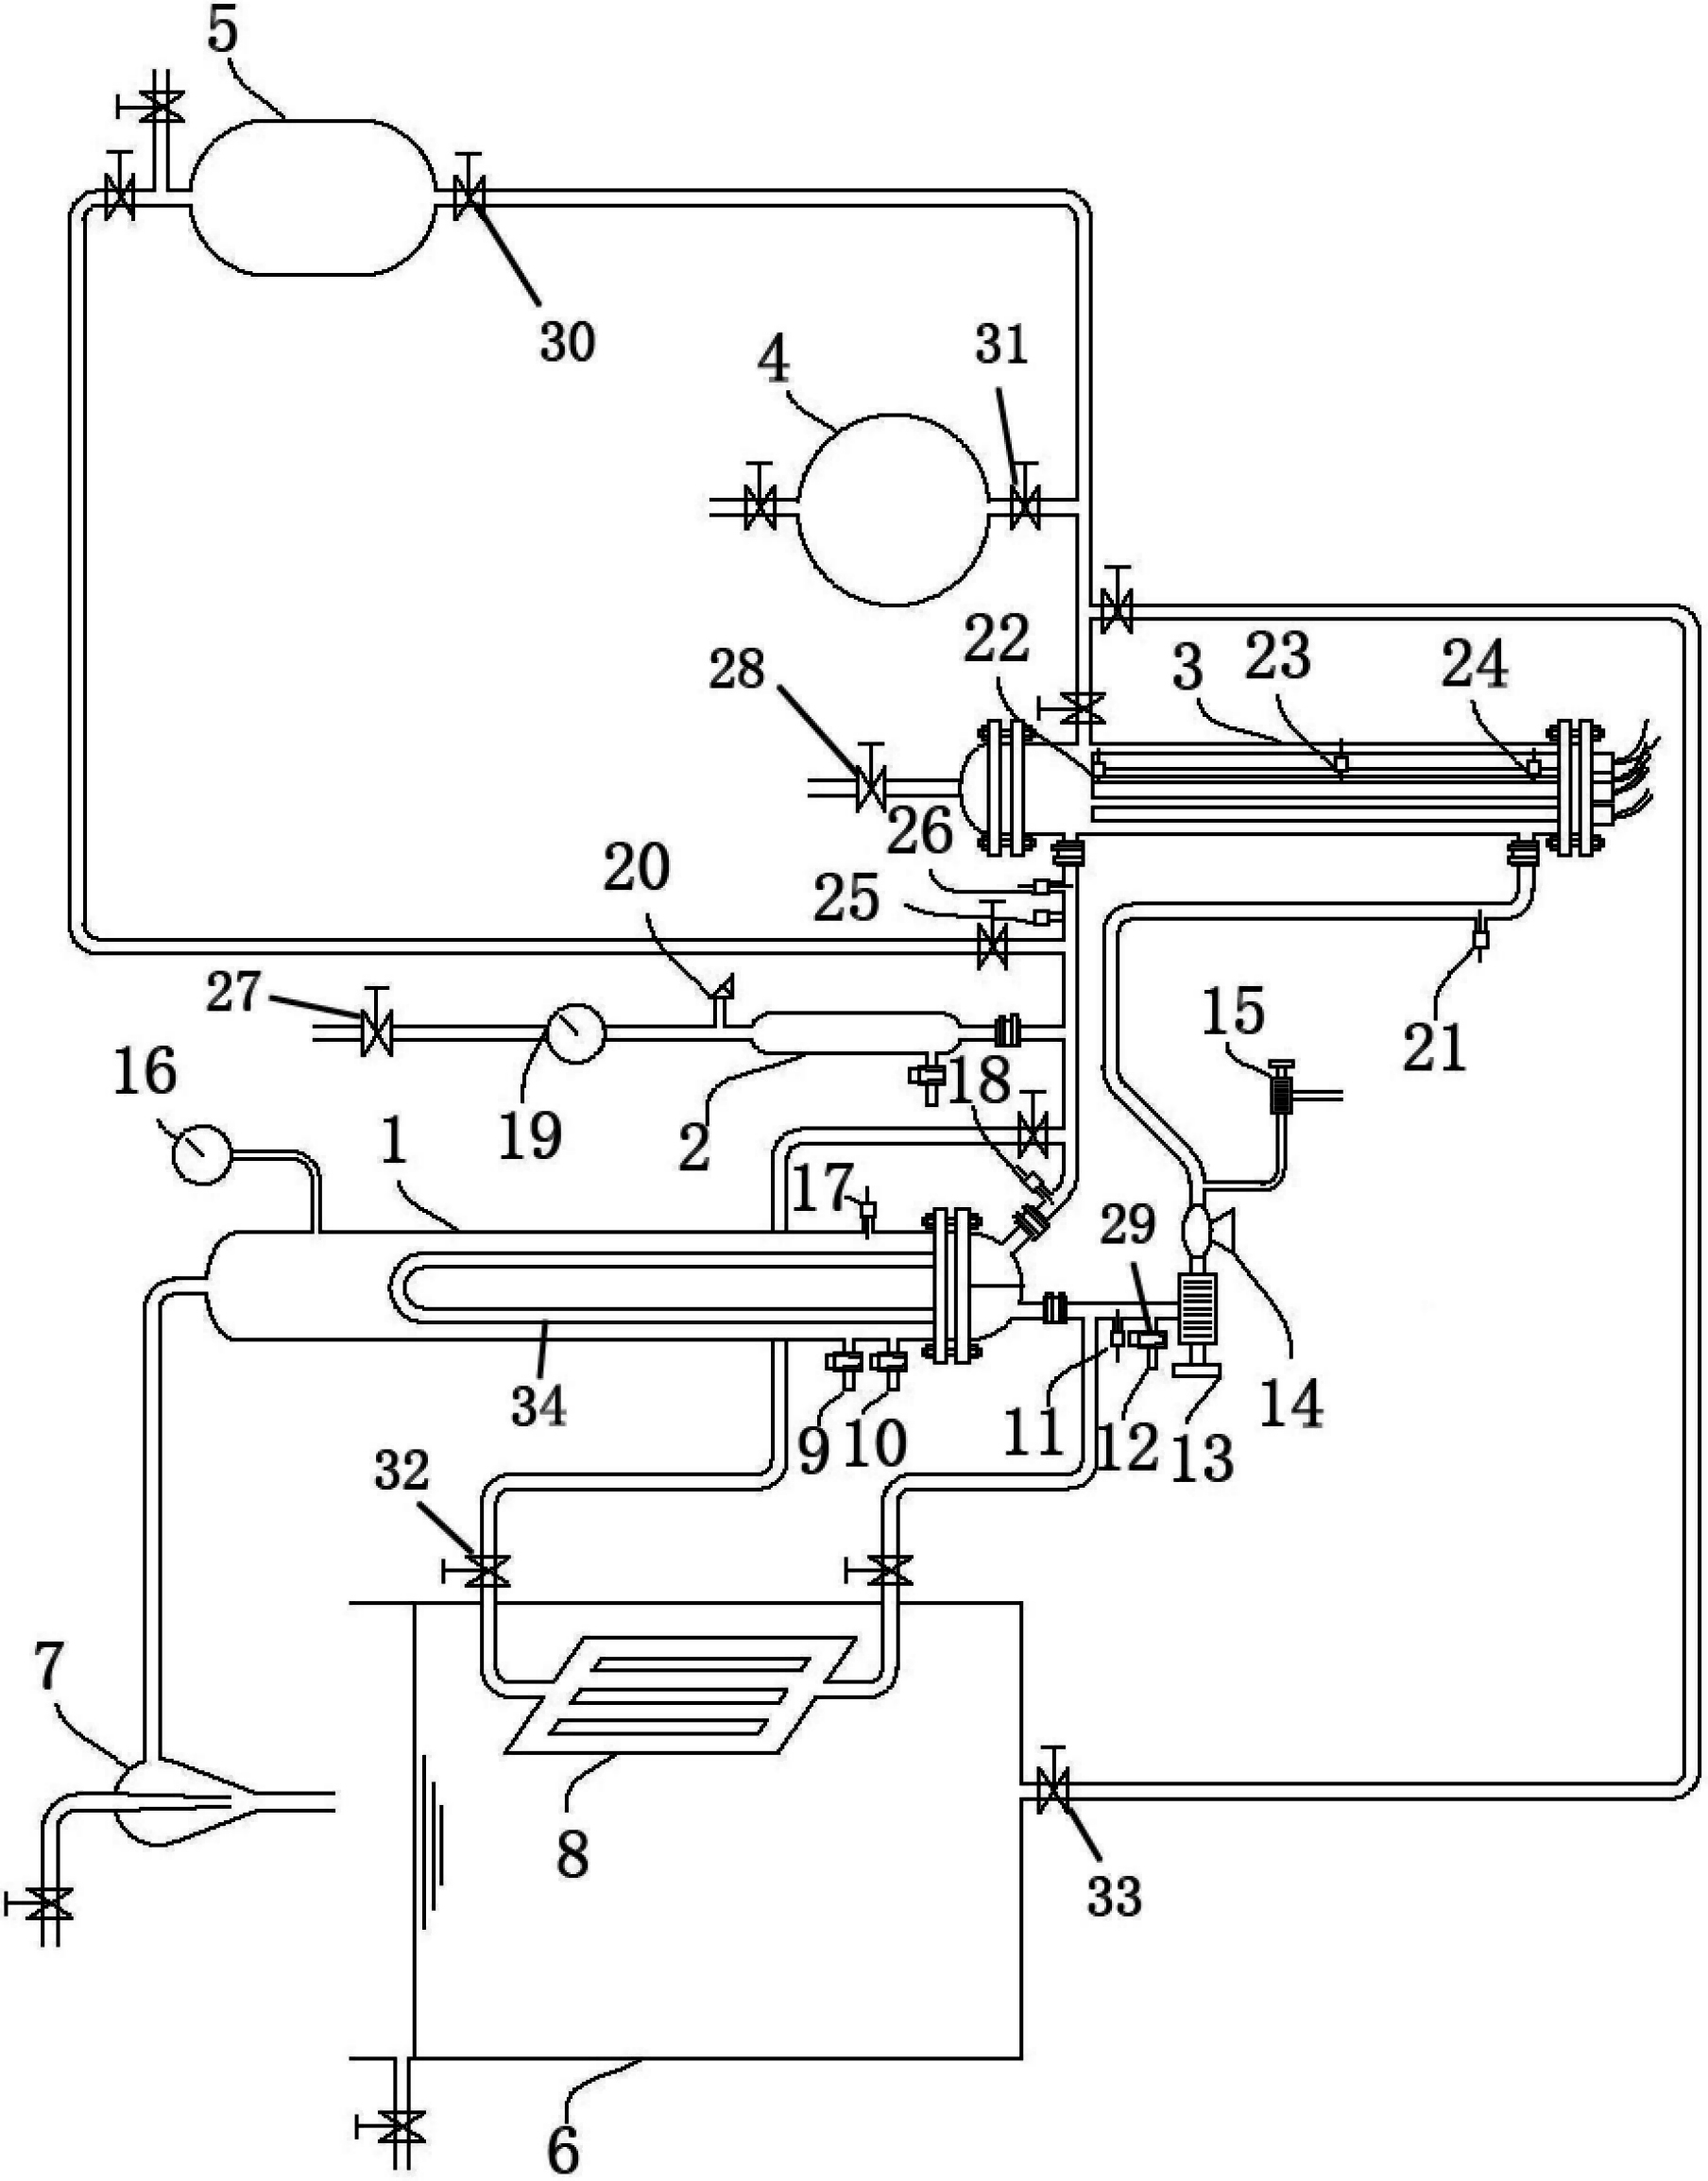 Simulation running apparatus for passive safety master system of pressurized water reactor nuclear island